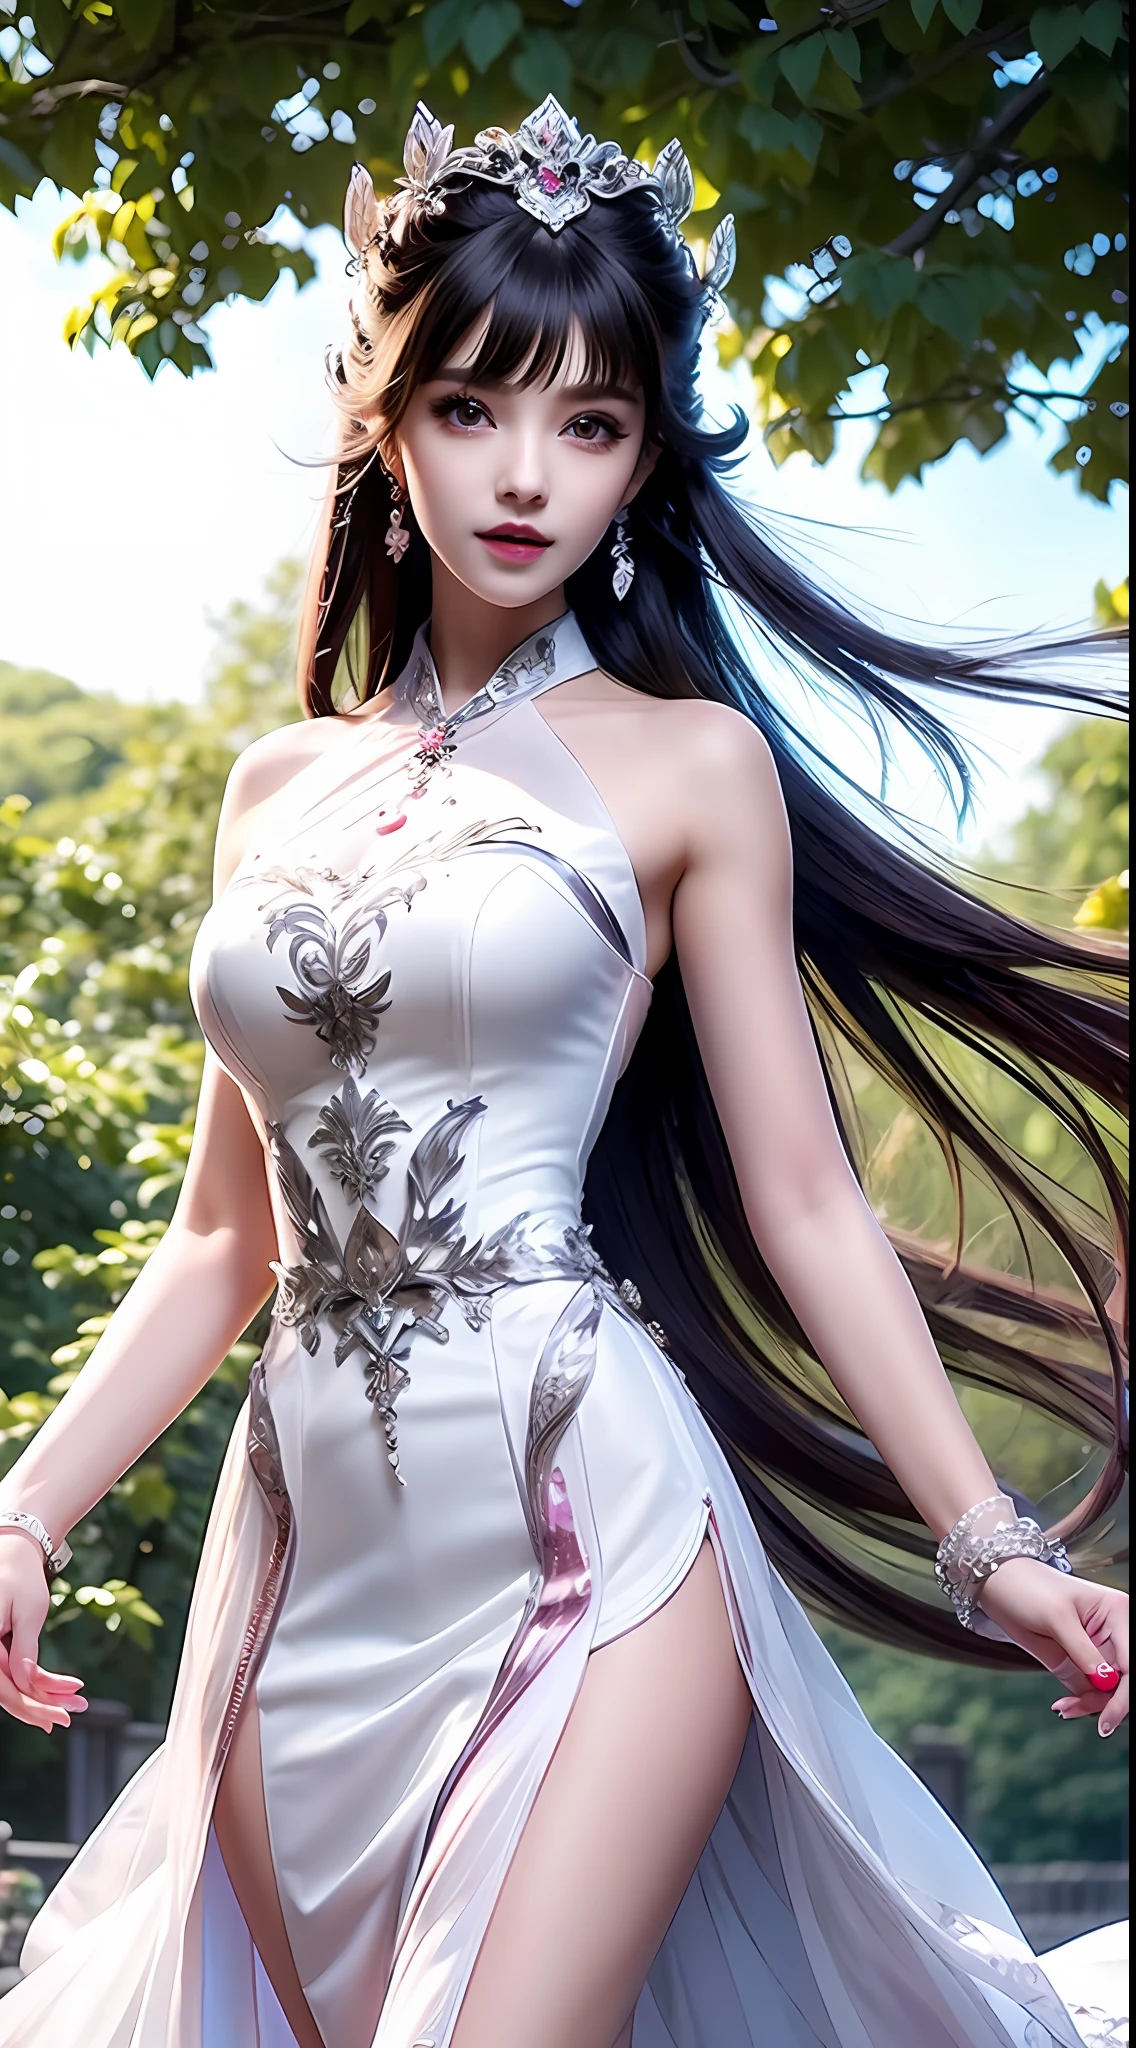 8k ultra hd, mastermiece, a girl, good face, detailed, eyes, beautiful lips, very hong hair, spreading hair, medium breasts, wedding dress, white dress, in the park, flying birds, blowing winds, clear weather, sitting, whole body capture,